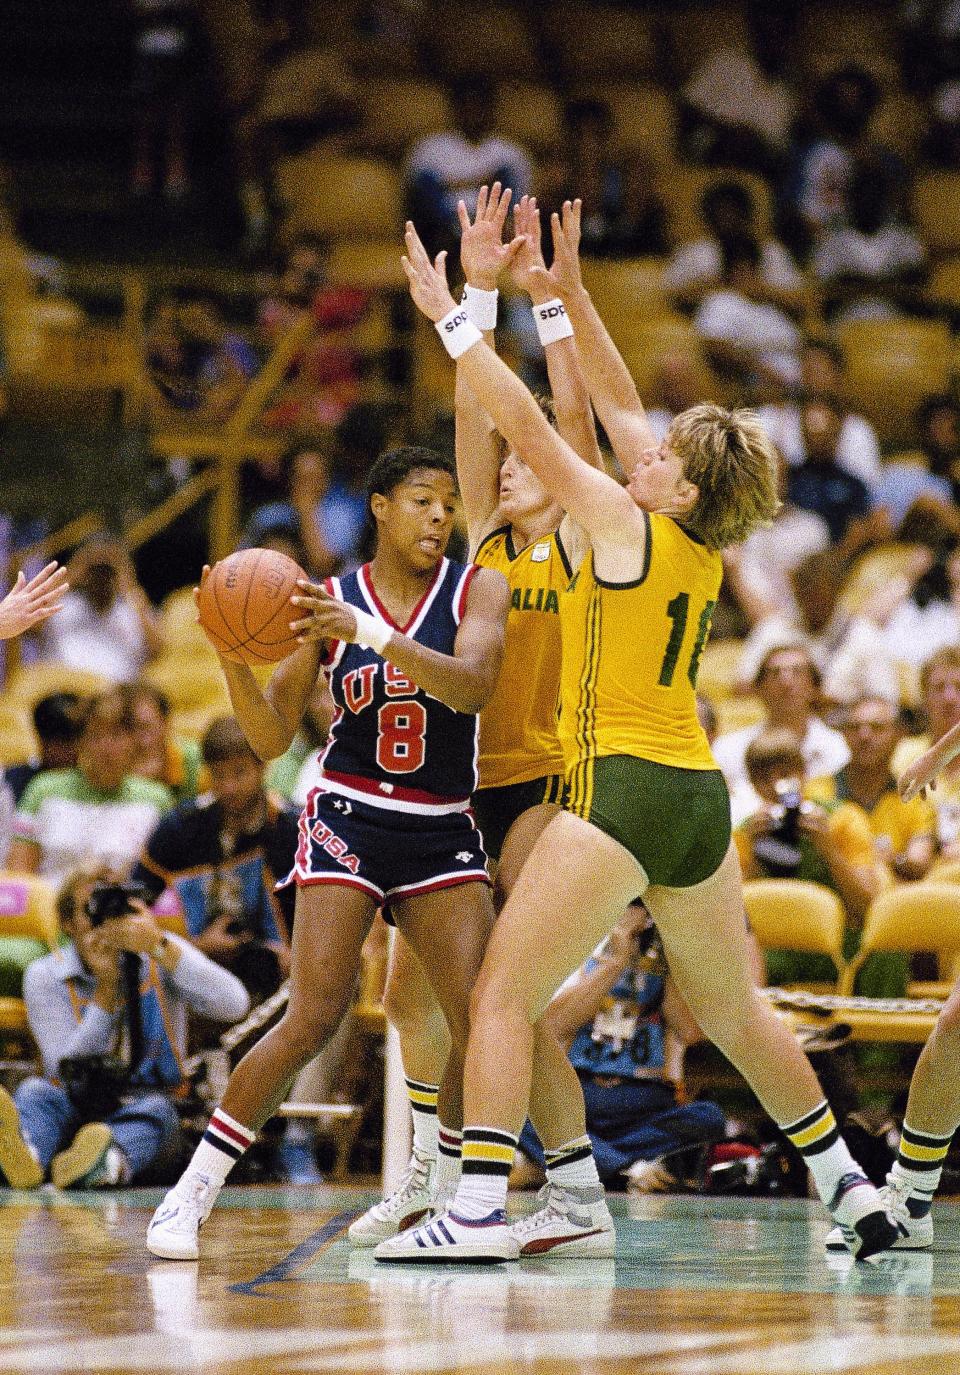 U.S.A's Cathy Boswell (left) and Australia's Patricia Mickan (right) look for the ball during Olympic basketball action, July 31, 1984 in Los Angeles. The U.S won 81-47. (AP Photo/Ray Stubblebine)